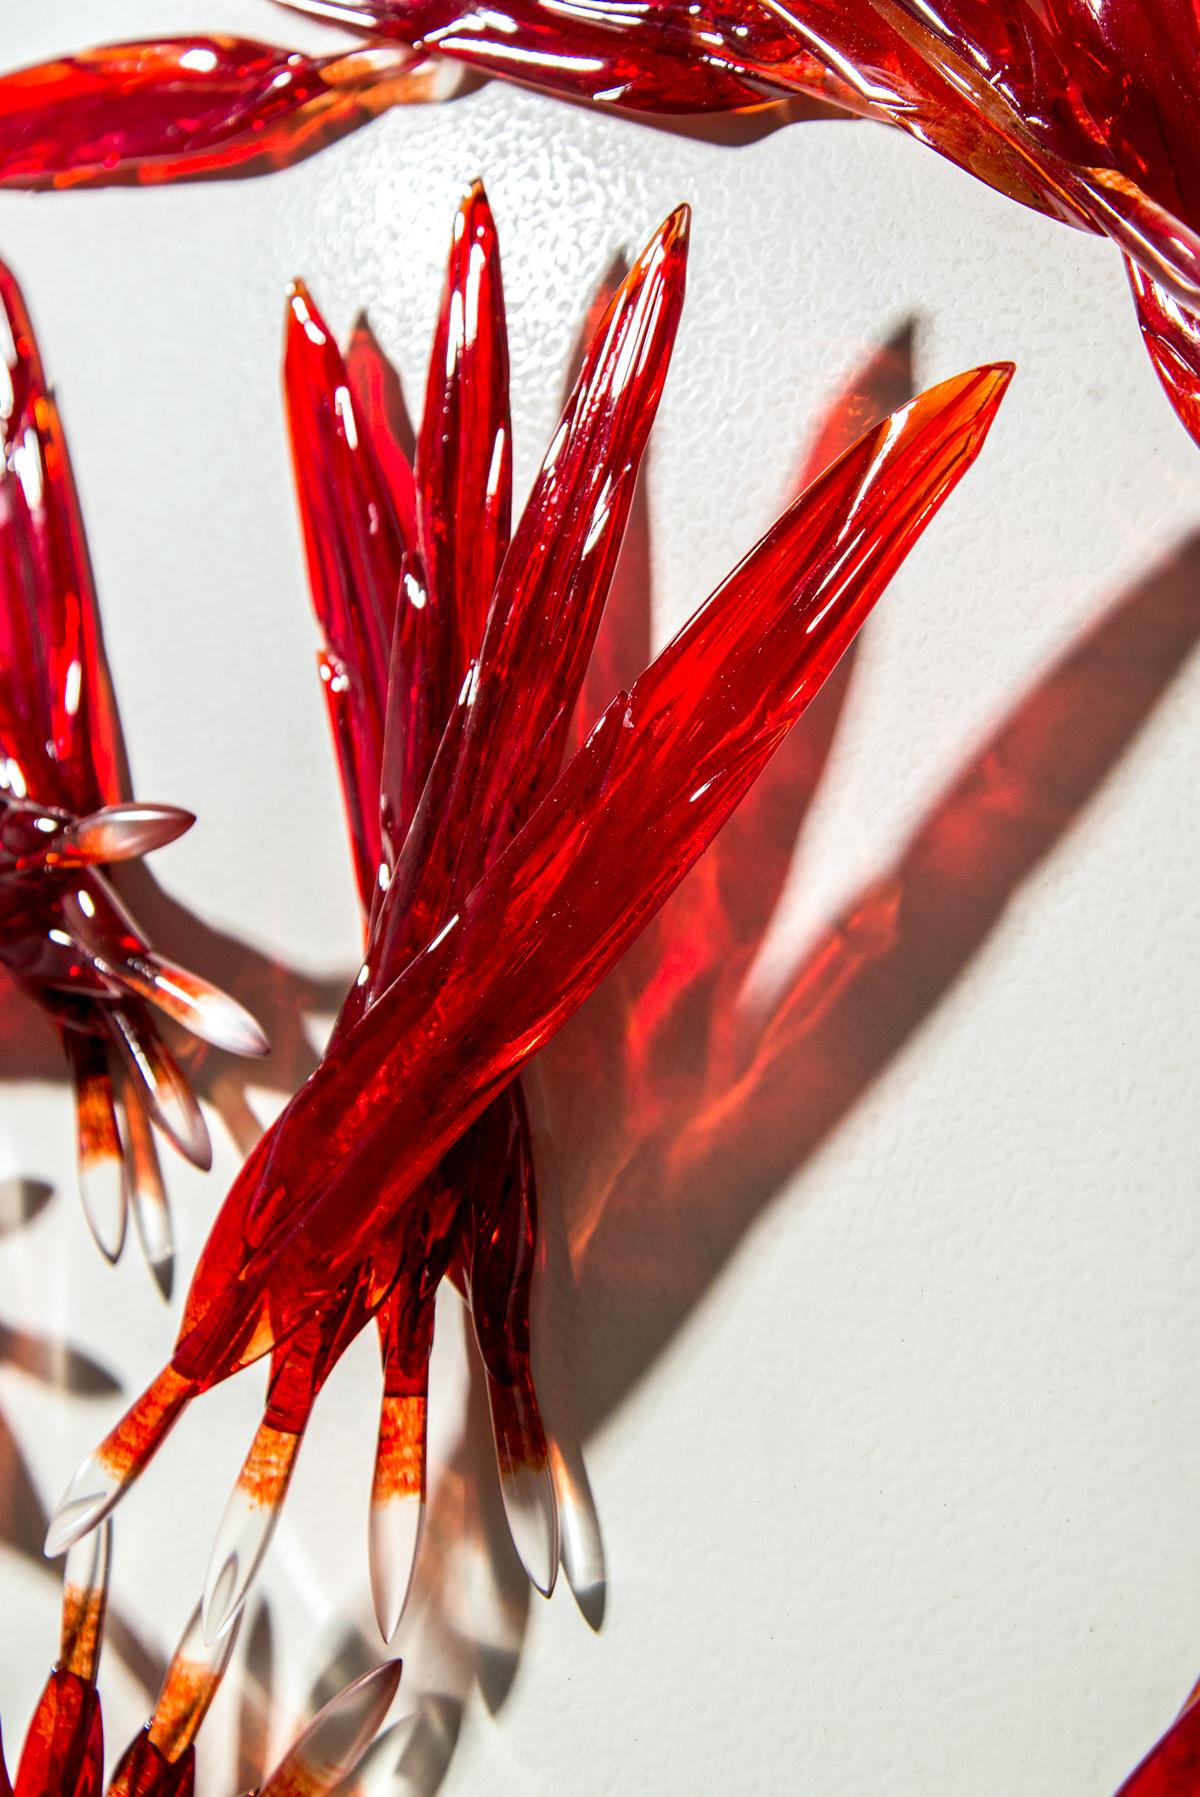 Fire Fly - large, red, translucent, feathers, solid glass wall sculpture - White Abstract Sculpture by John Paul Robinson